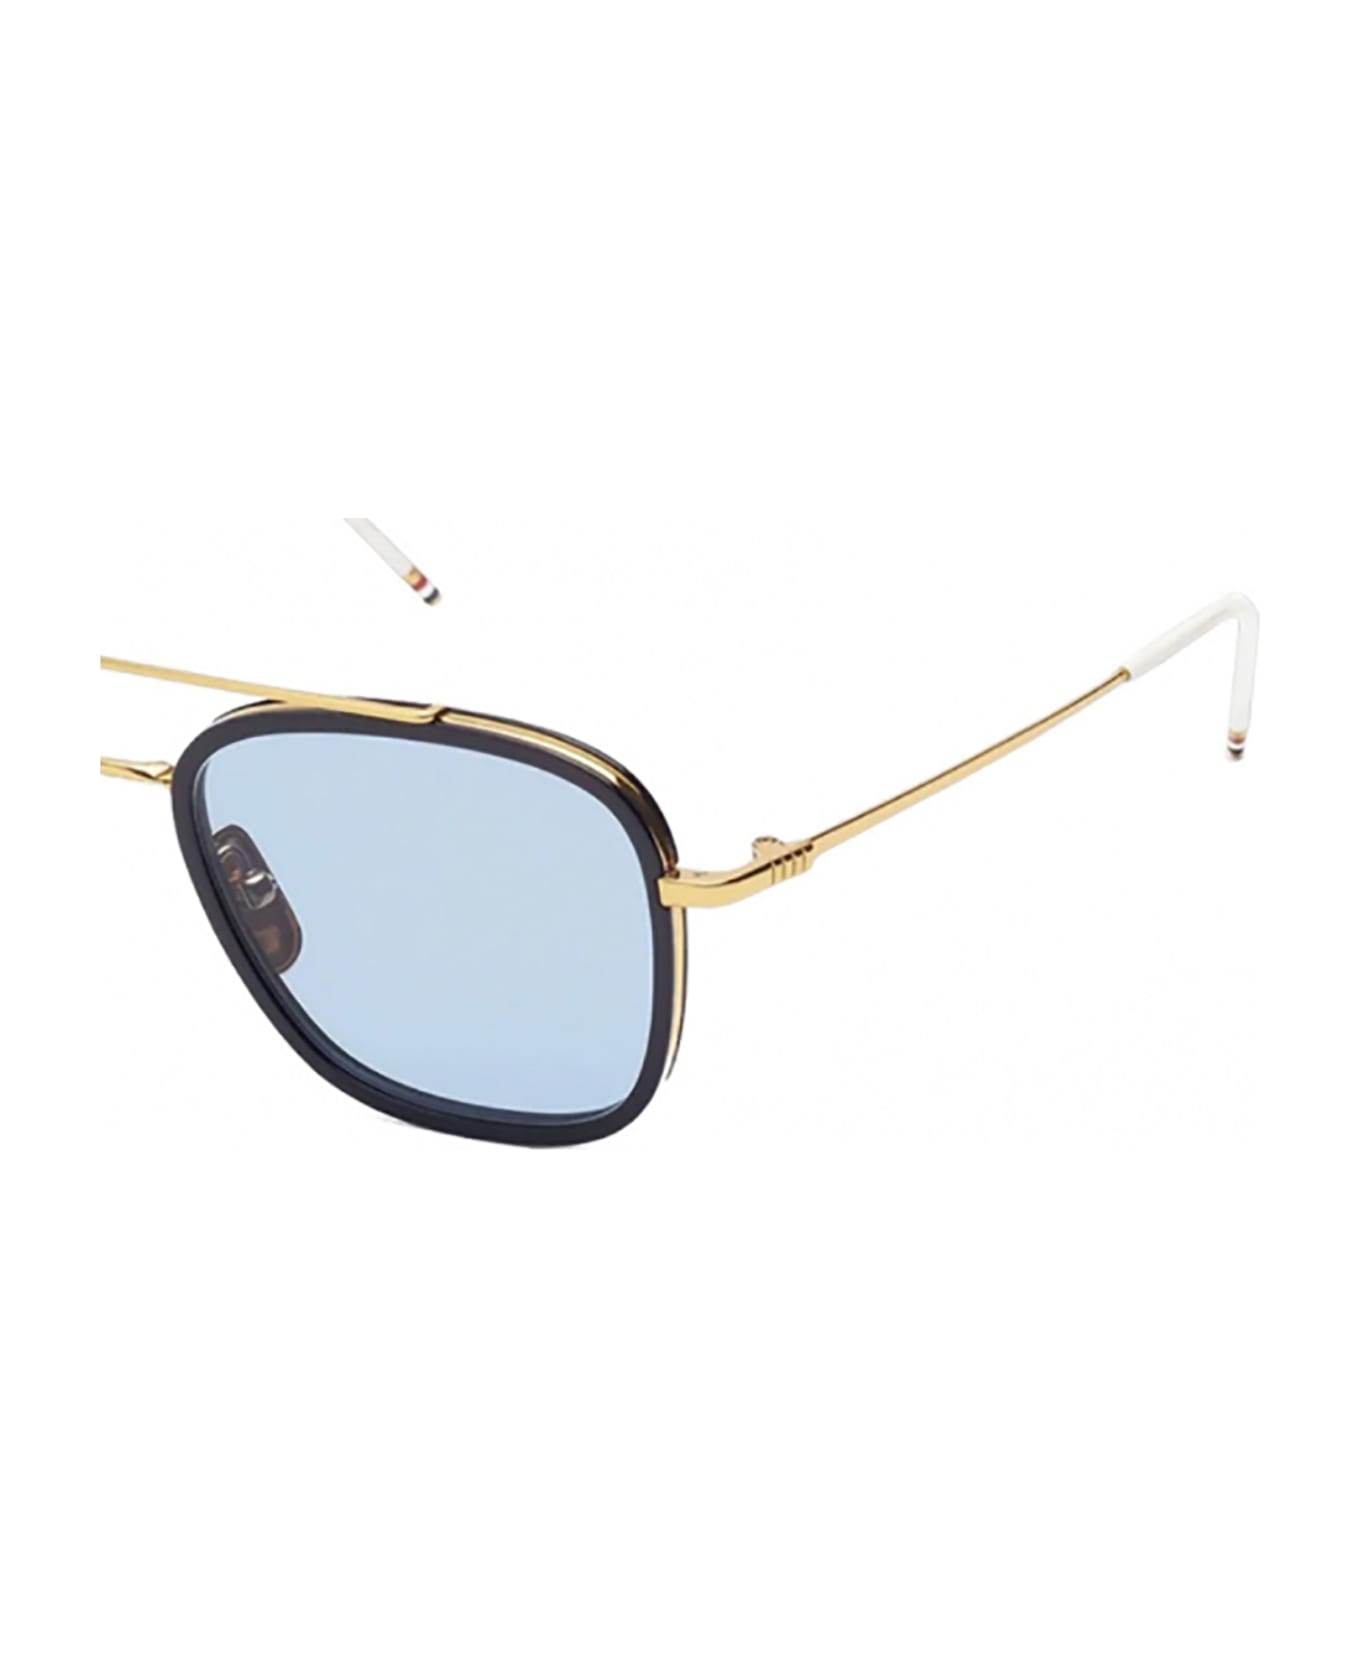 Thom Browne Ues800a-g0003-415-51 Sunglasses - 415 NAVY